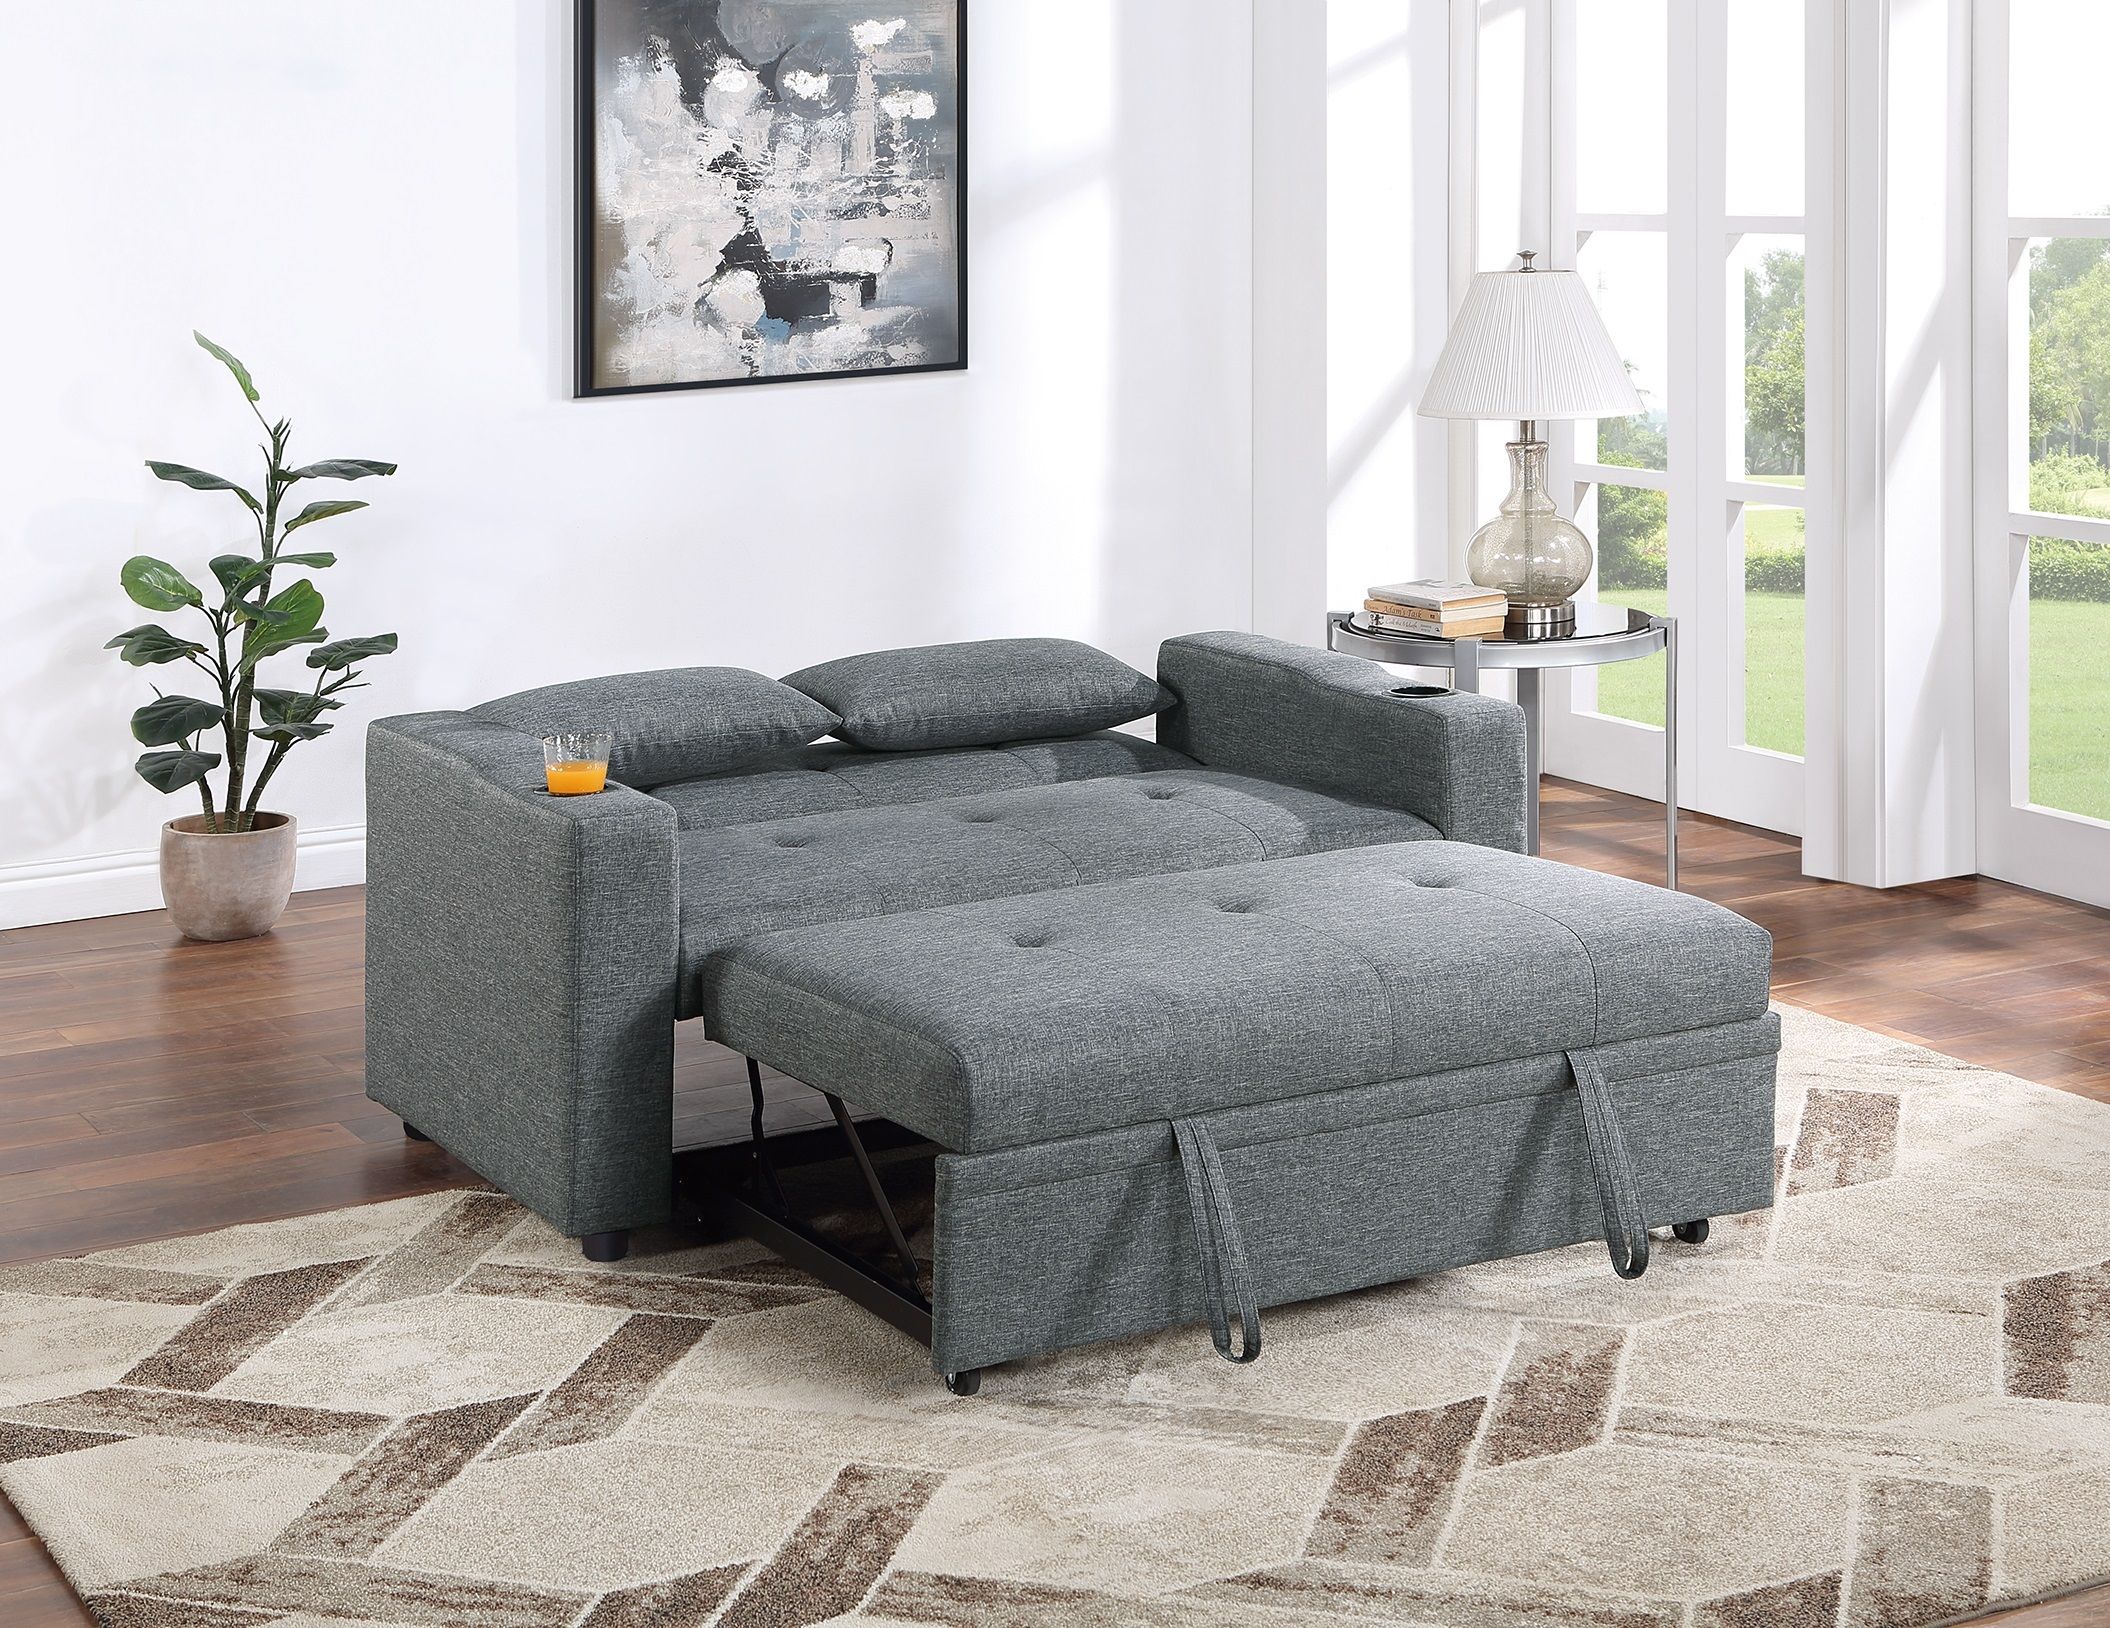 Contemporary Black Gray Sleeper Sofa Pillows Plush Tufted Seat Convertible Sofa Width Cup Holder Polyfiber Couch Living Room Furniture